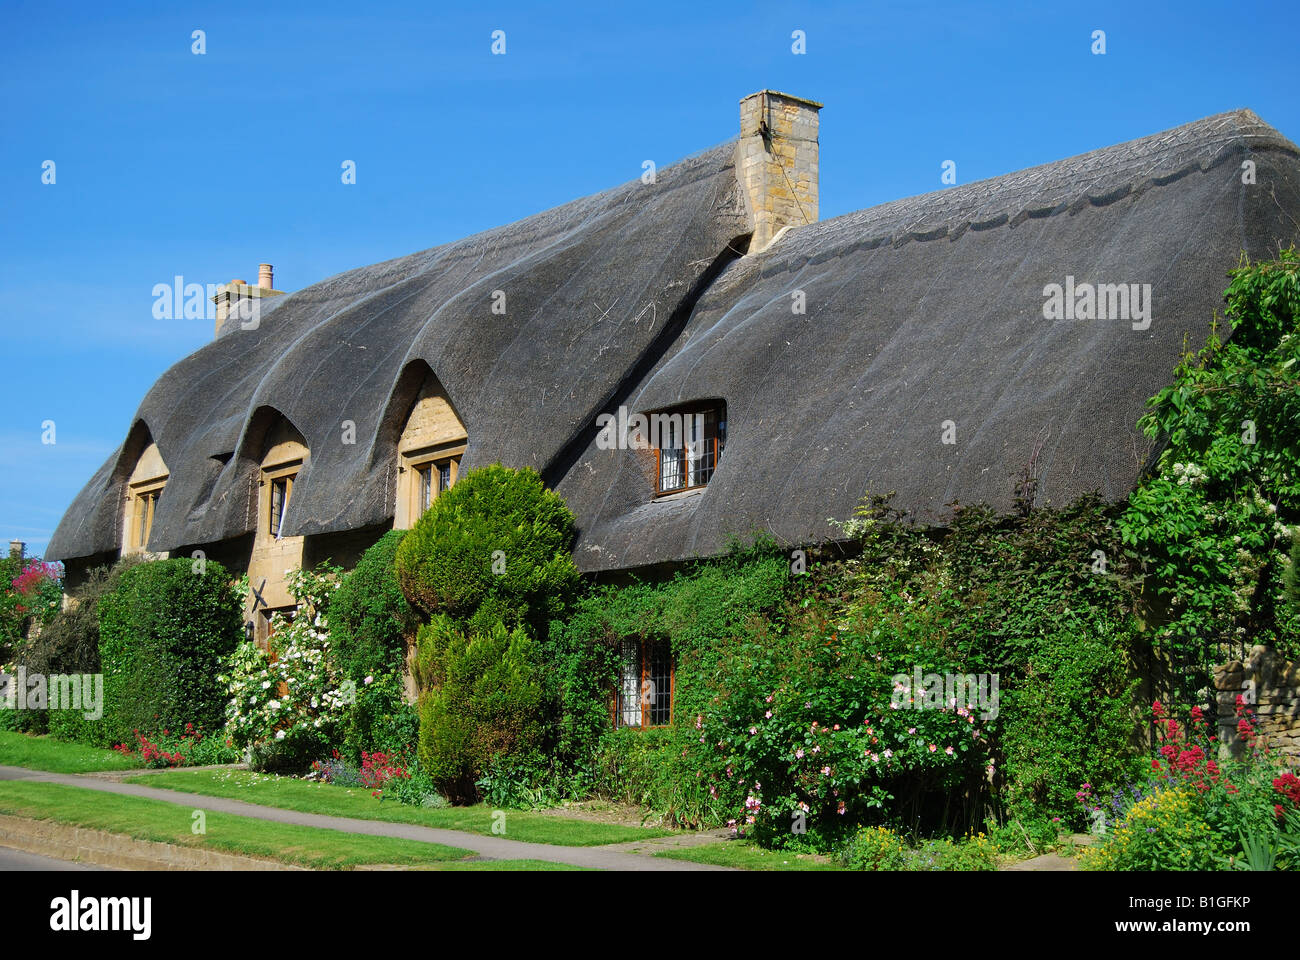 Cotswold Reetdachhaus, Chipping Campden, Cotswolds, Gloucestershire, England, Vereinigtes Königreich Stockfoto